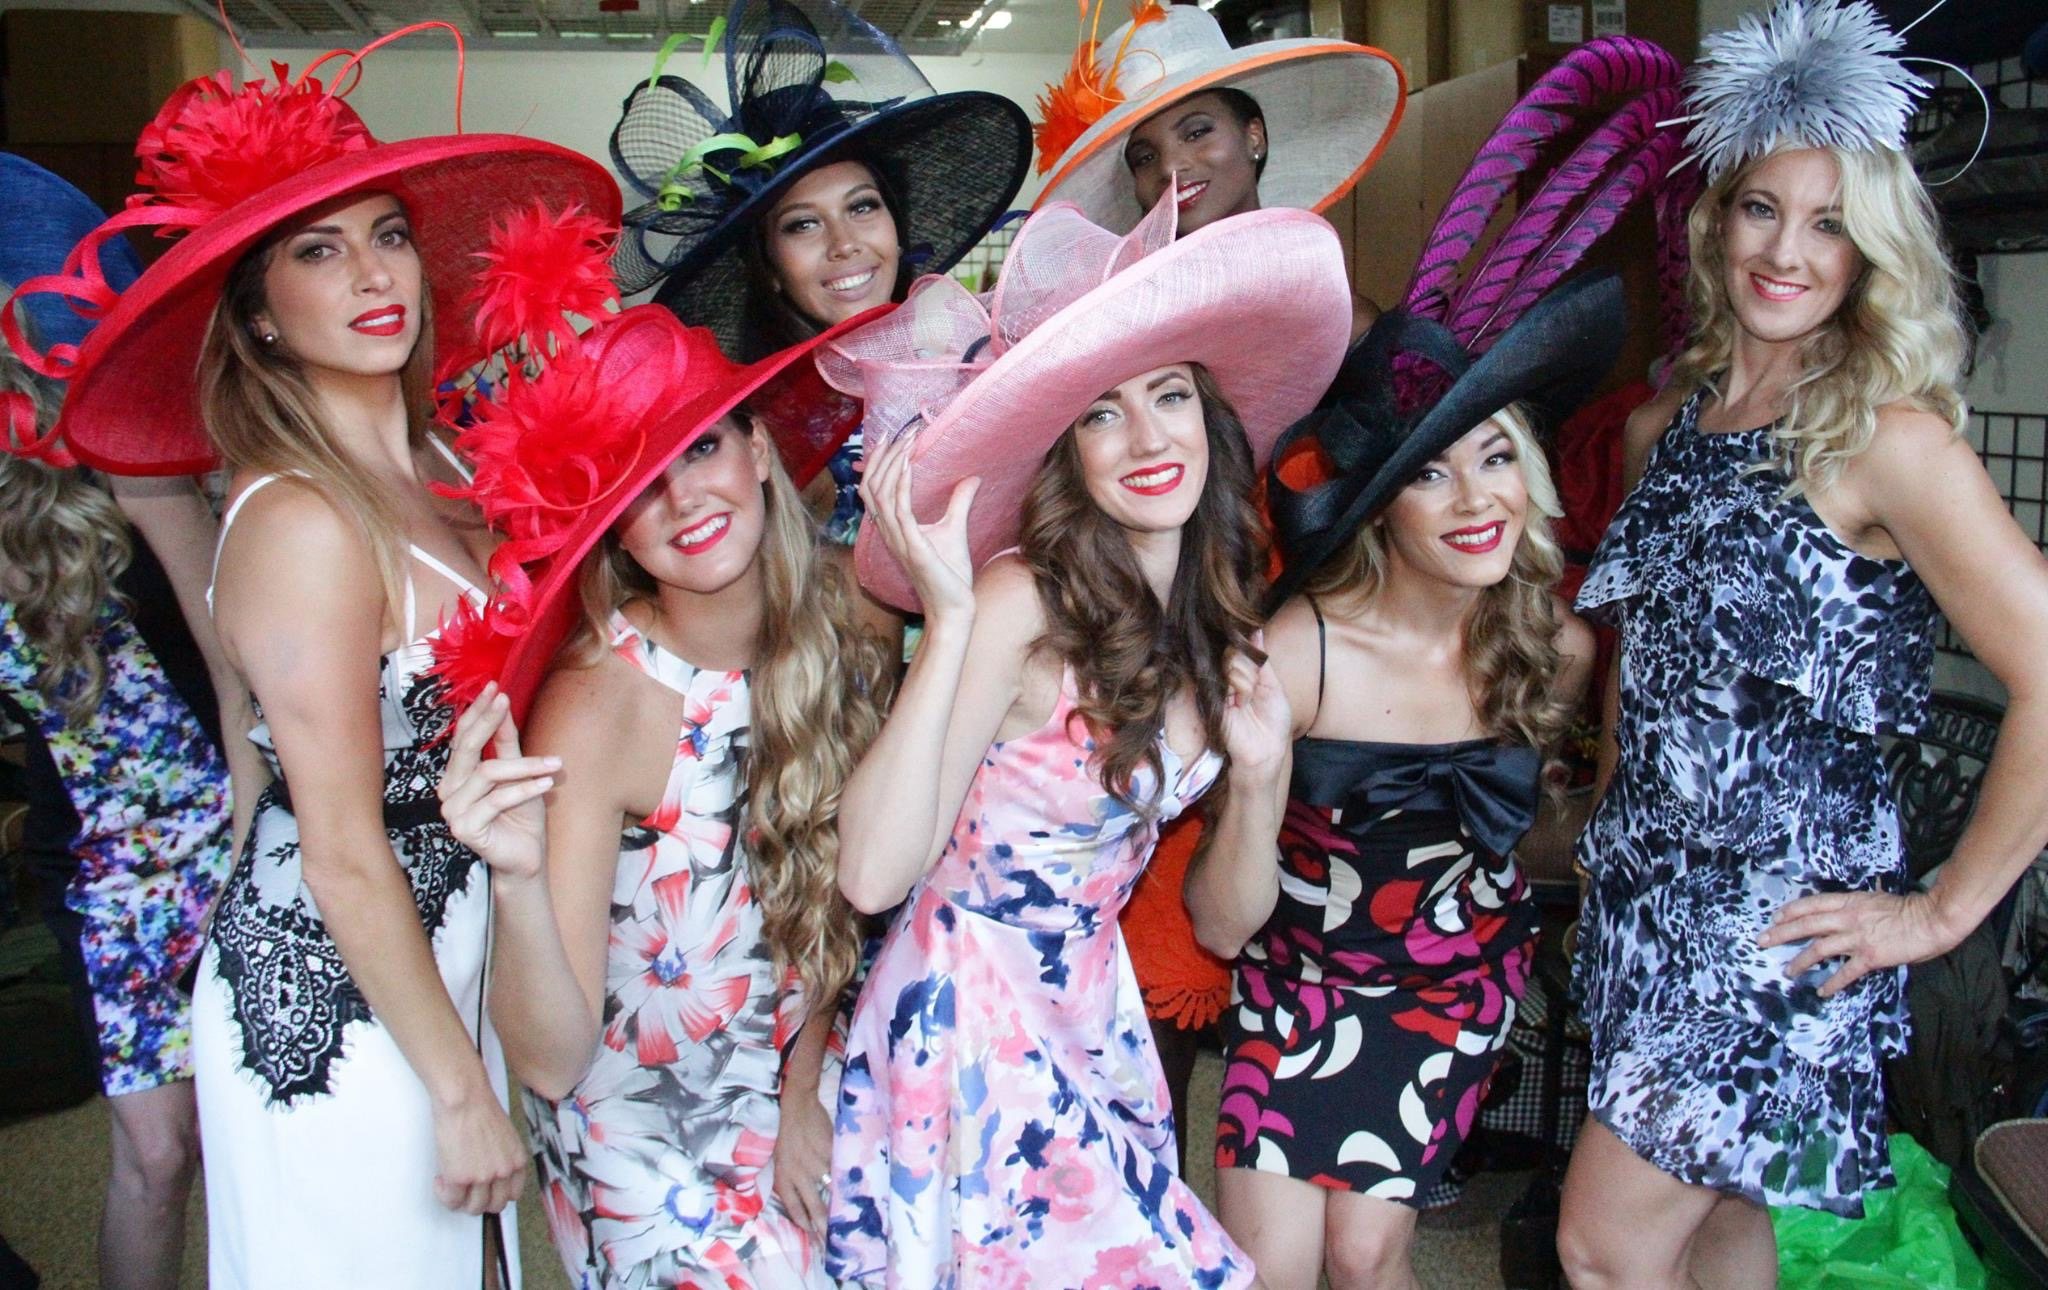 Pink formal hat. Kentucky Derby hat. Royal Ascot. Couture hat. Designer hat. Red carpet hat.  only Wedding, races, church